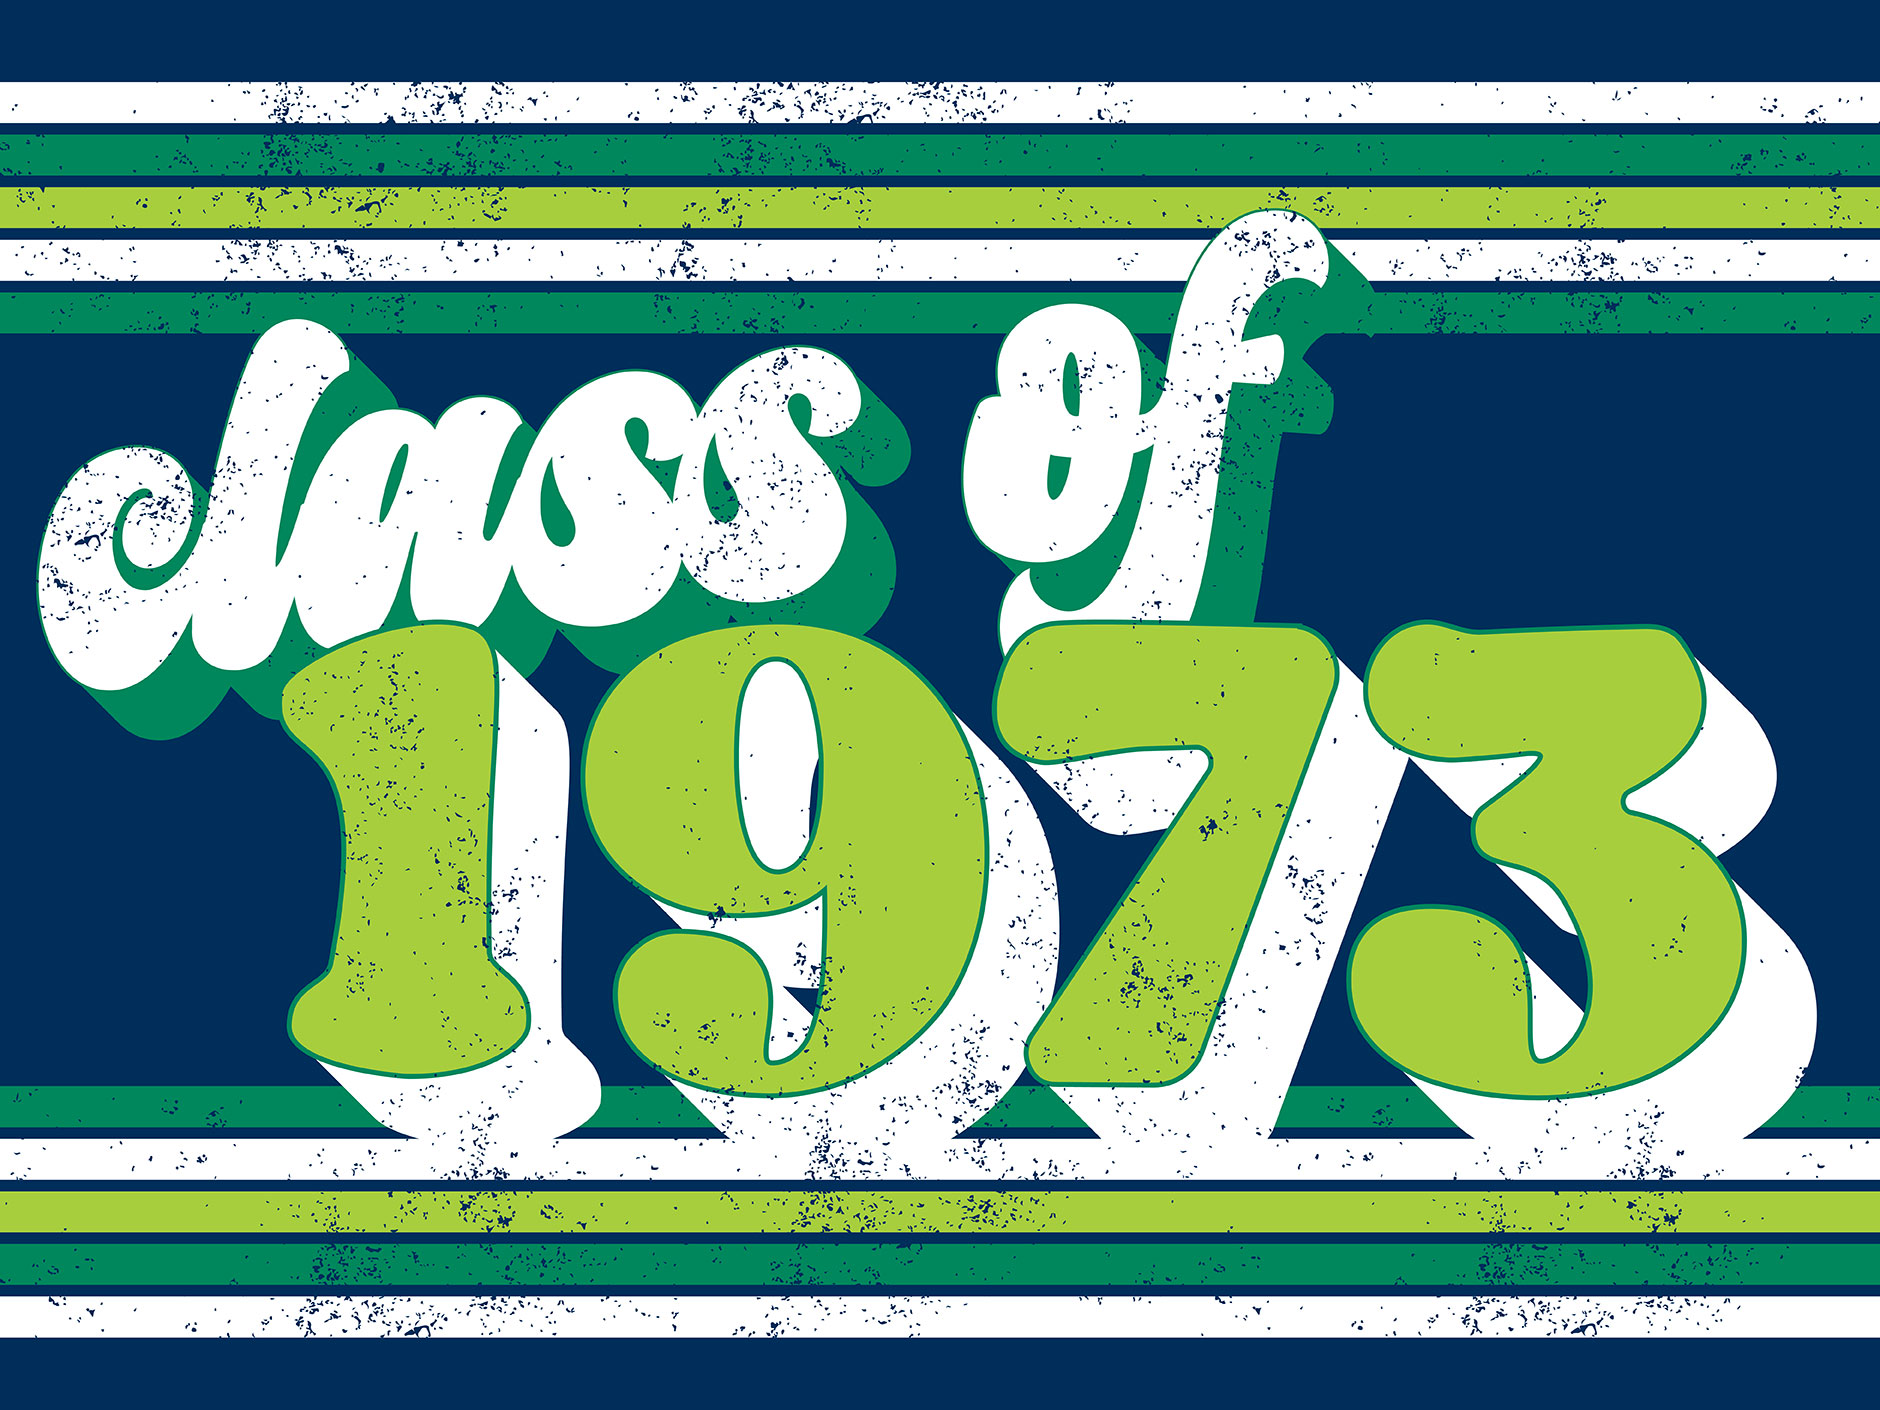 Ahead of the upcoming reunion weekend in June, we’re celebrating the Class of 1973 with a look back into popular culture and monumental events 50 years ago.